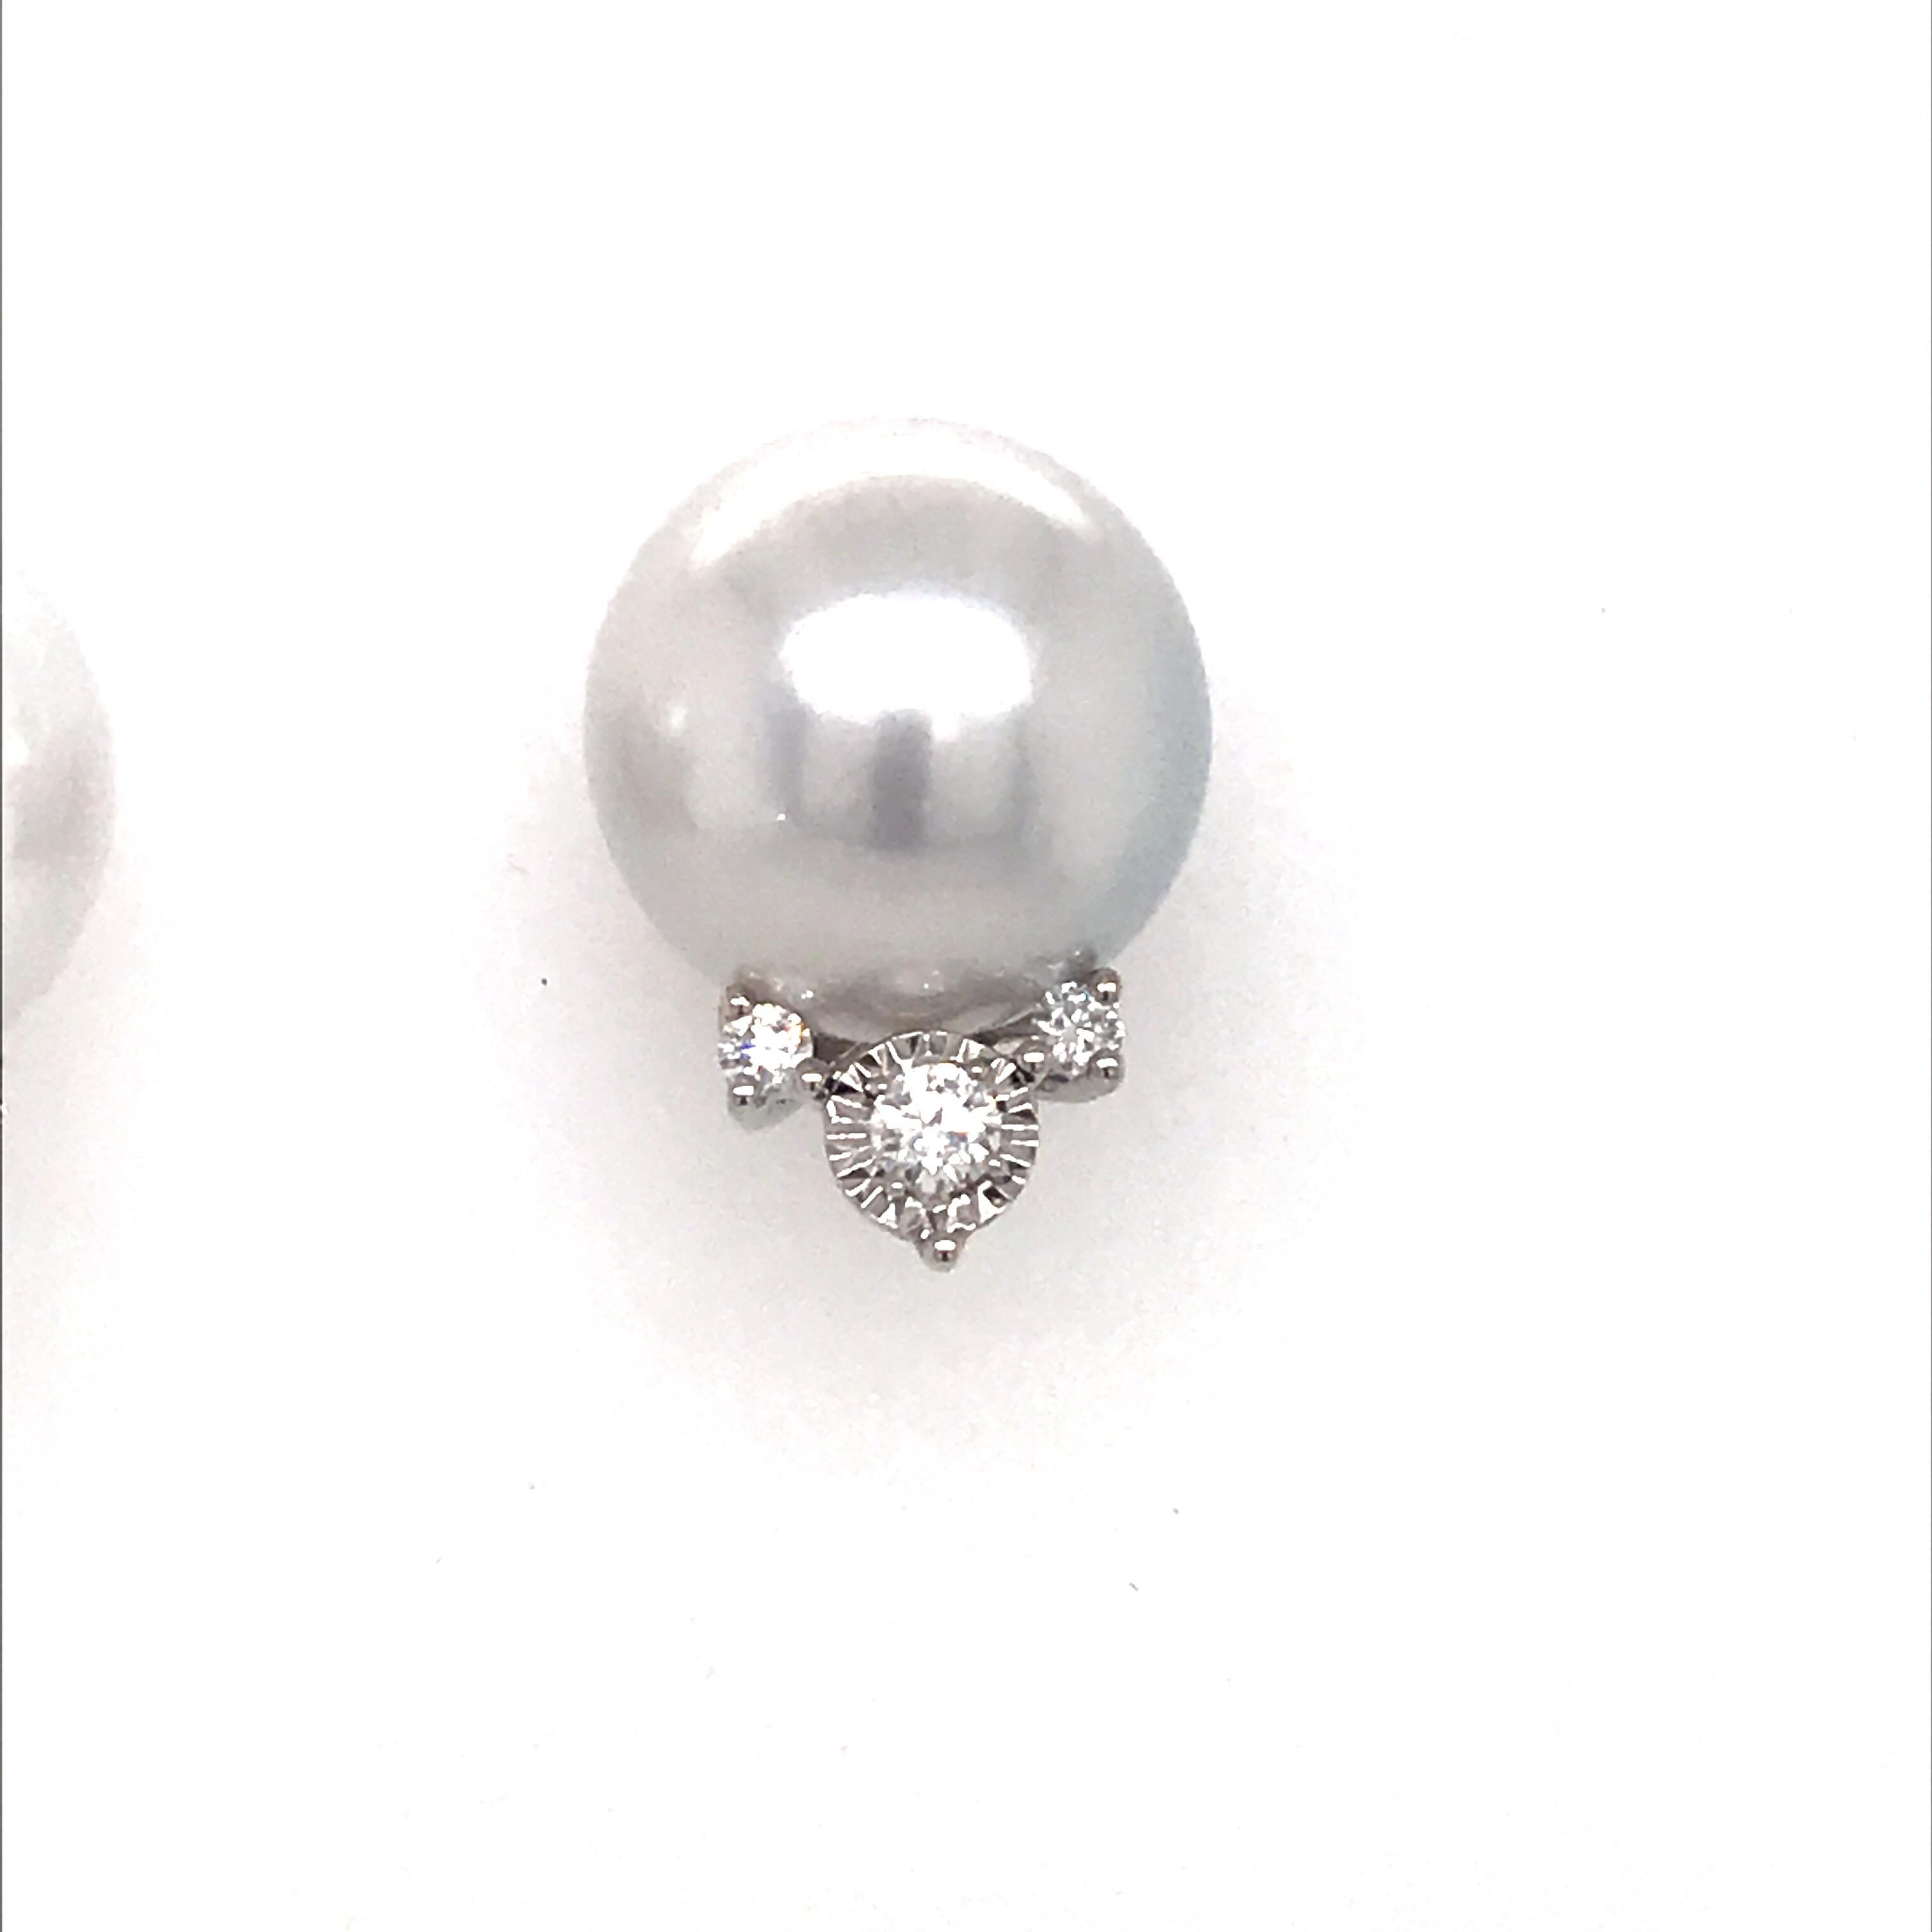 18K White gold stud earrings featuring two white South Sea Pearls measuring 14-15 mm flanked with two center diamonds weighing 0.19 carats and 4 round brilliants weighing 0.15 carats.
Color G-H
Clarity SI